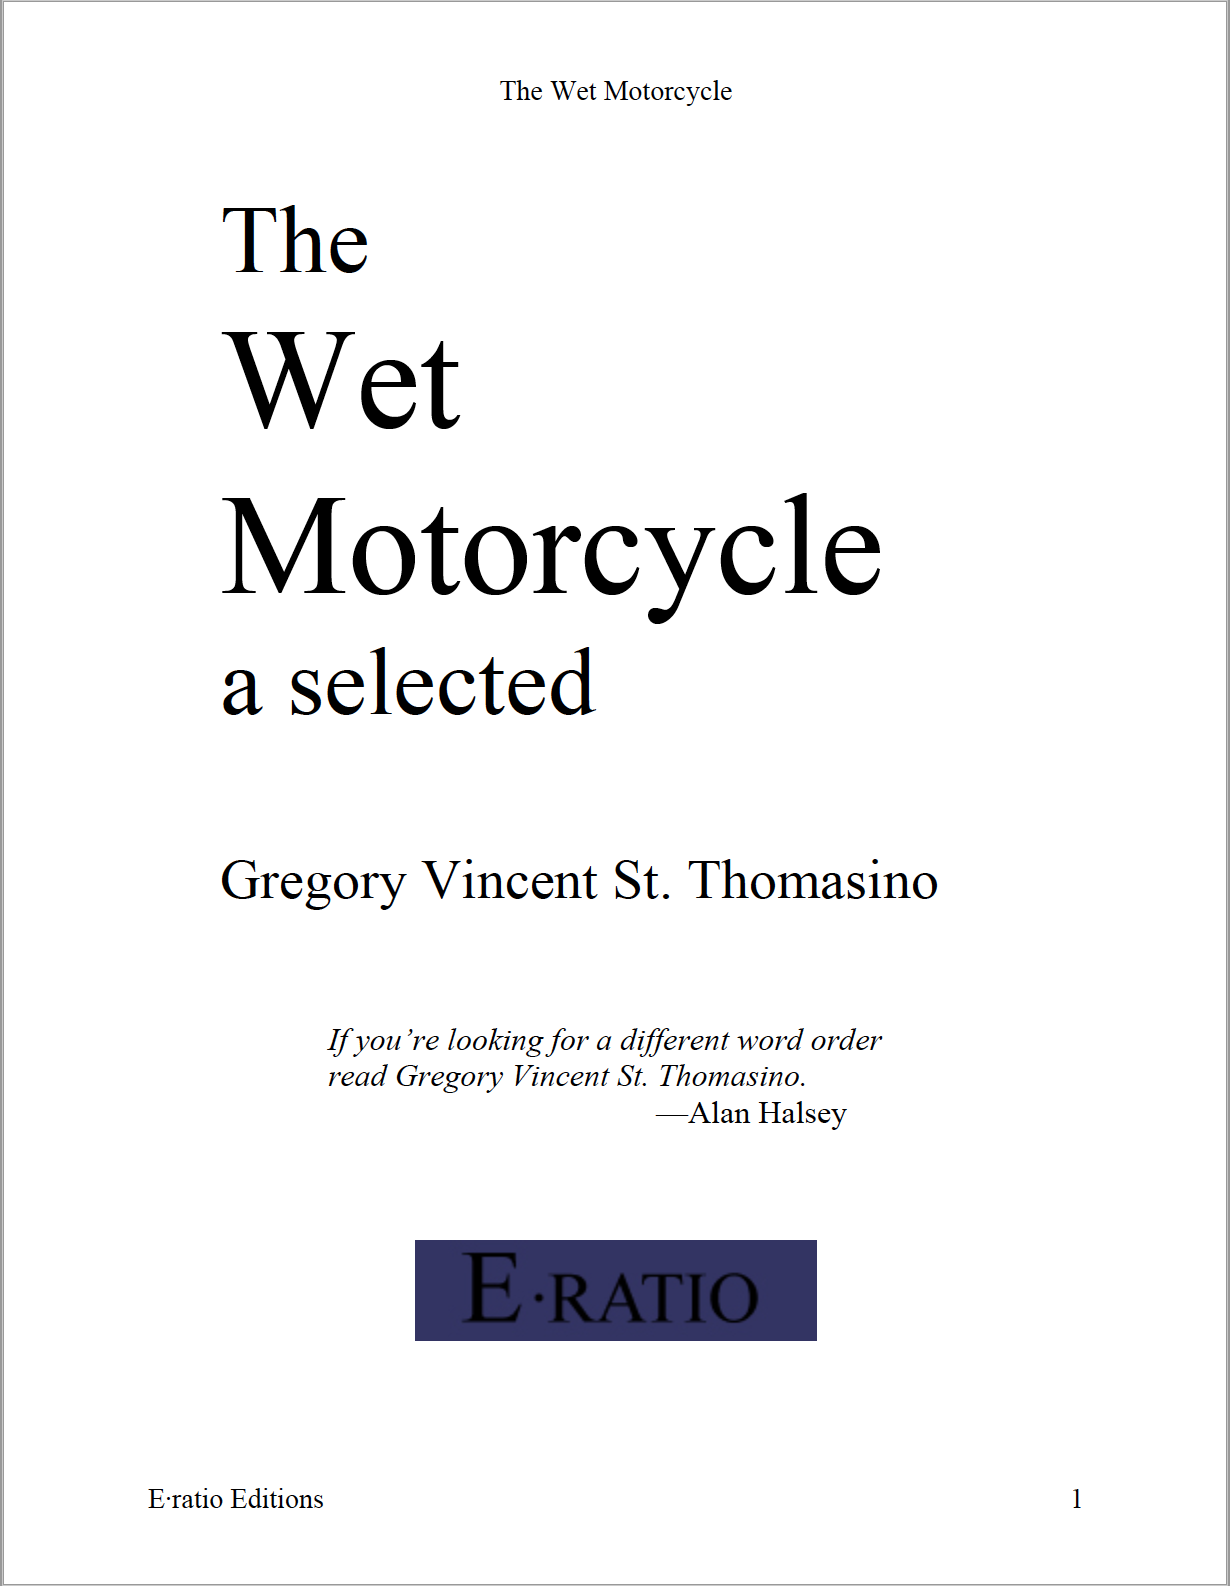 The Wet Motorcycle